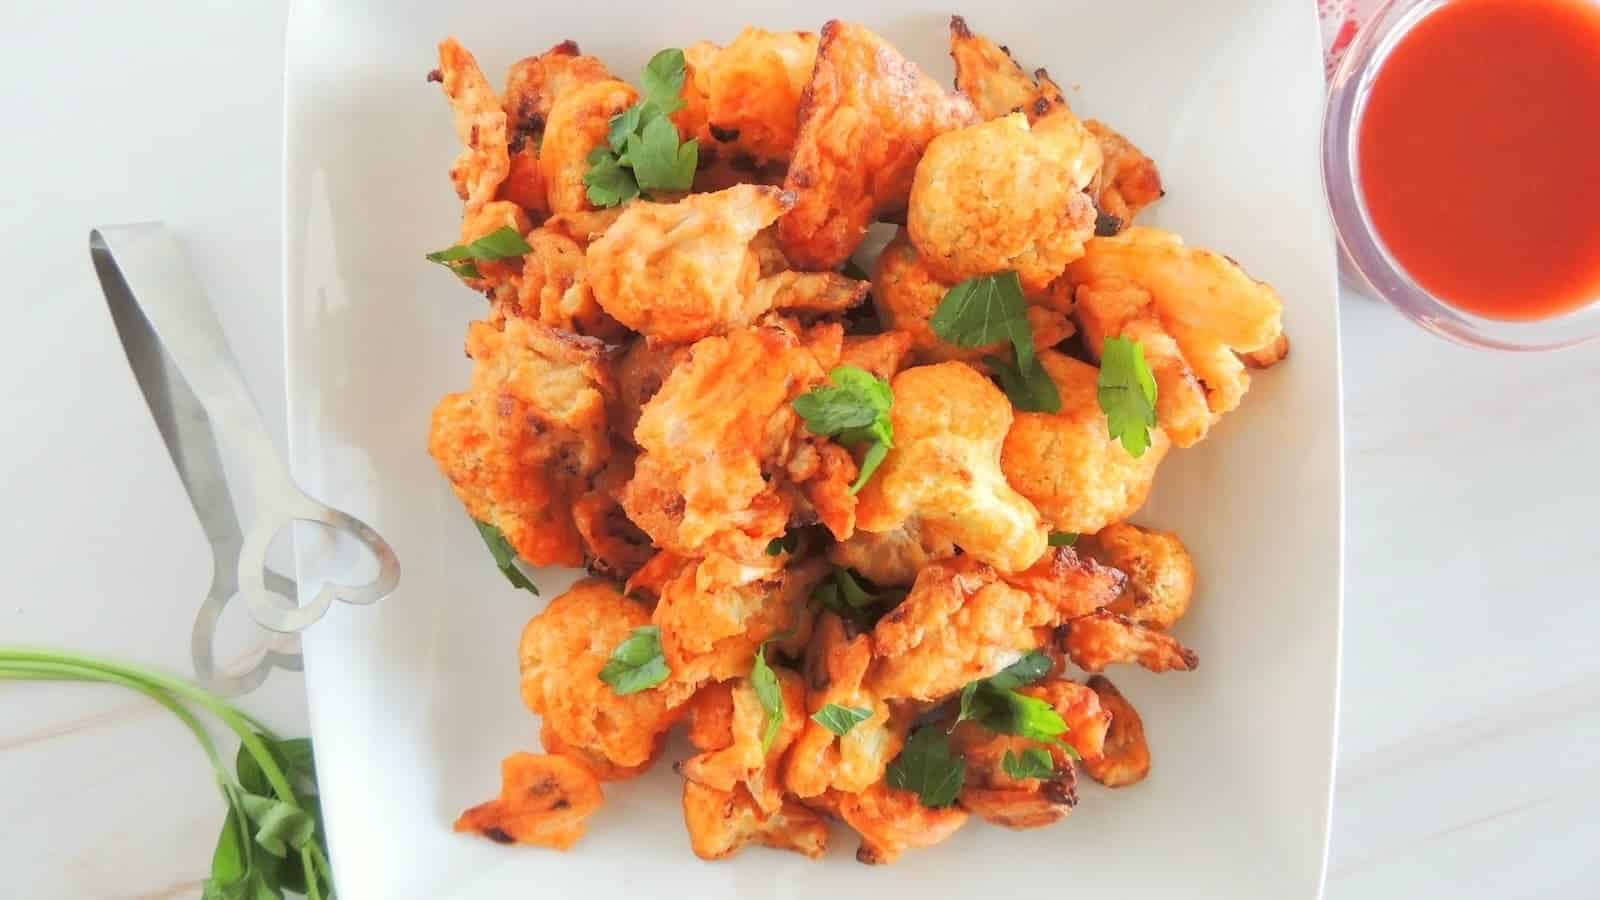 A plate of baked spicy cauliflower bites with red sauce next to it.